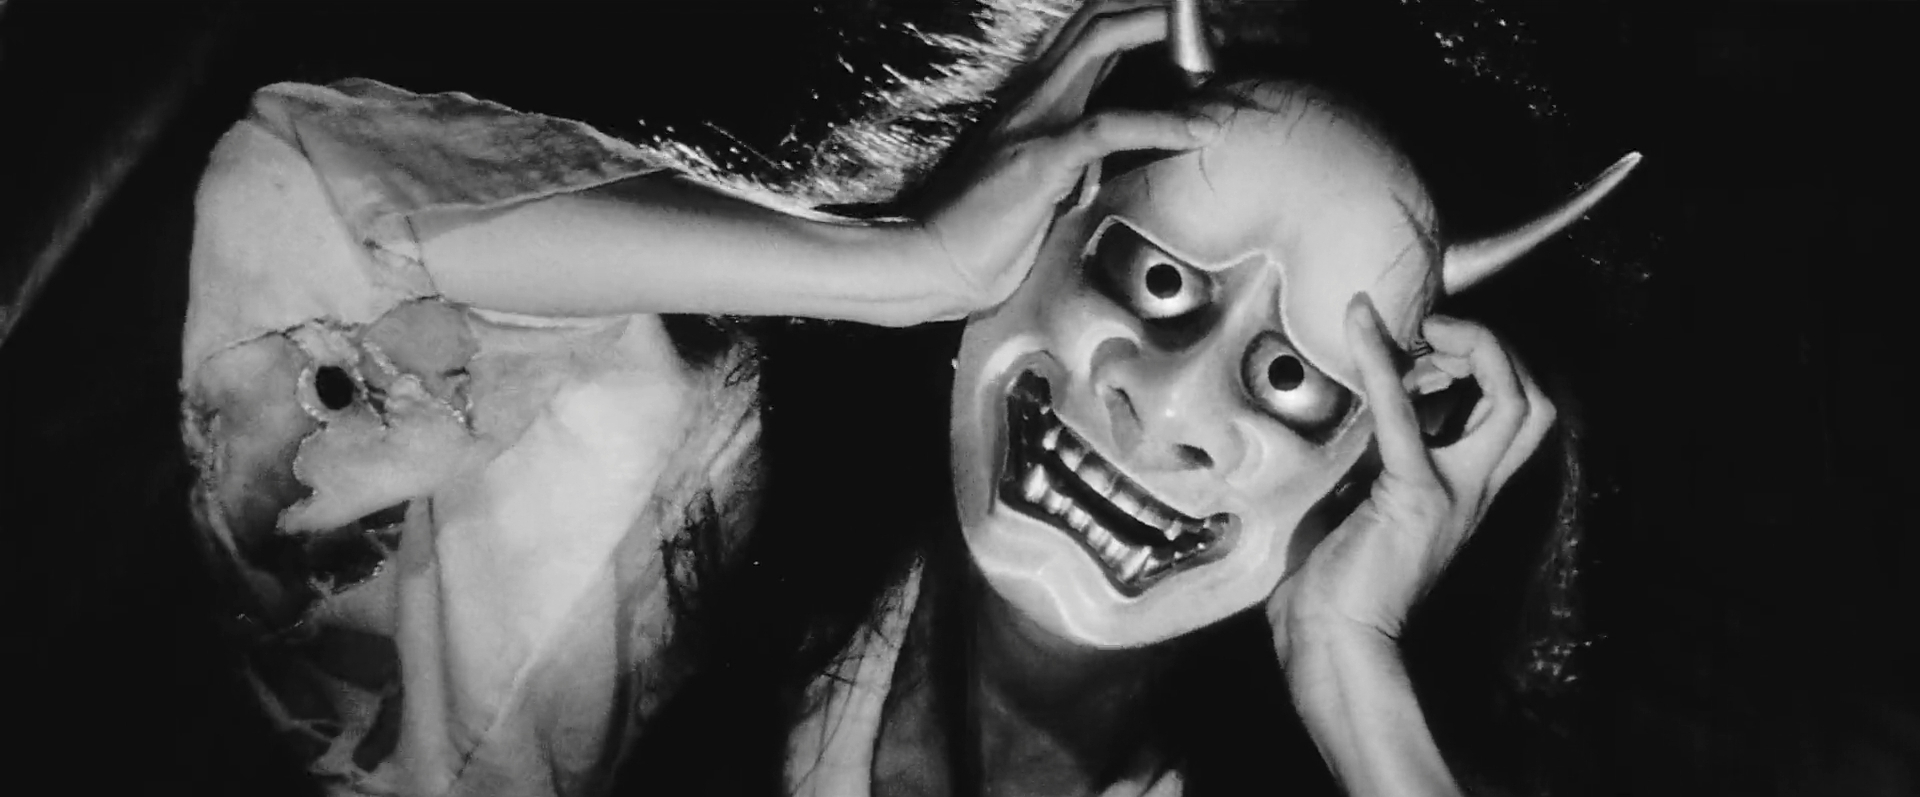 Black Cats and Monster Masks: The Other Side of Horror in 'Onibaba' (1964)  and 'Kuroneko' (1968) – Flip Screen